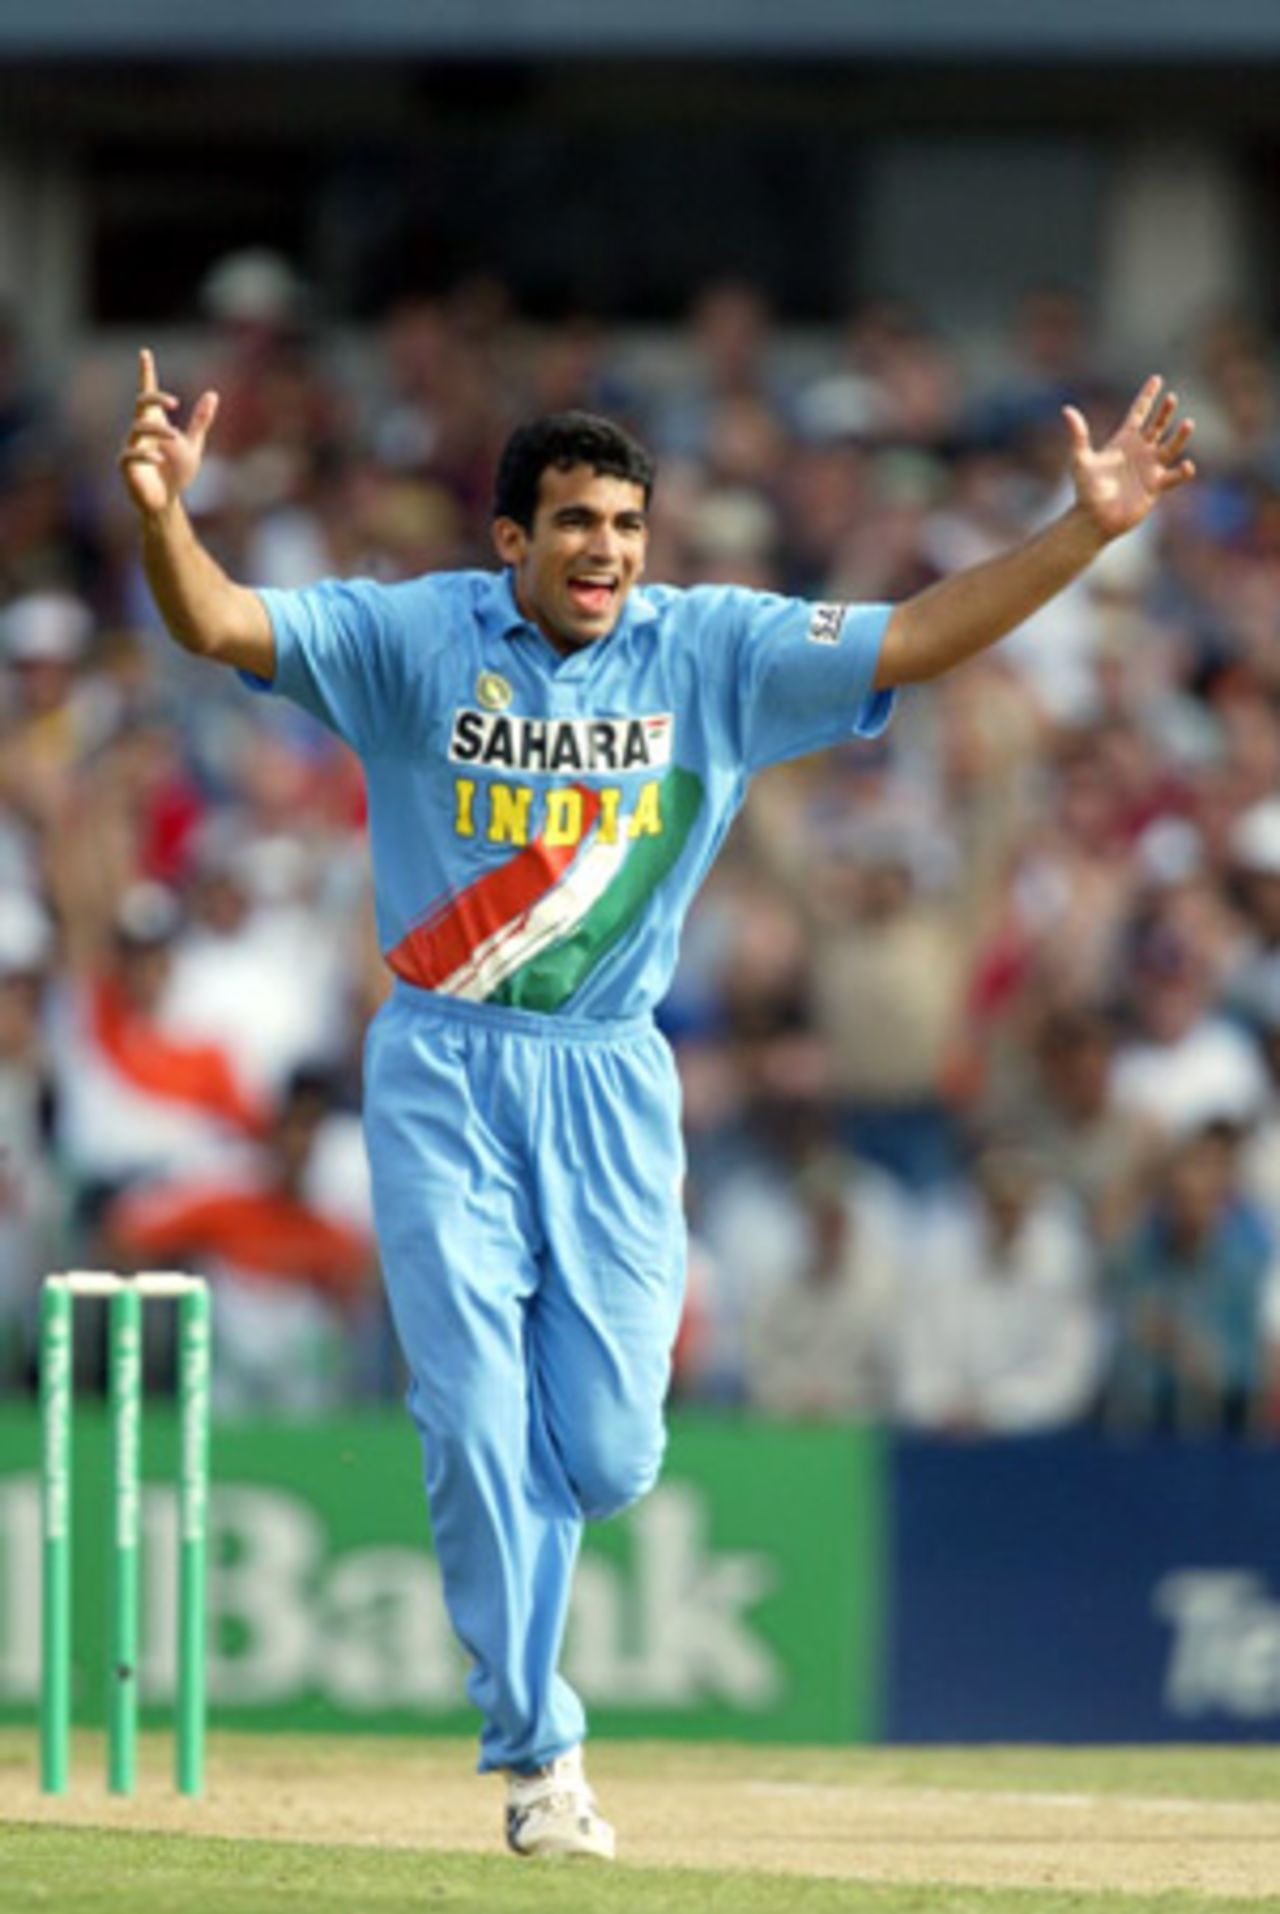 Indian bowler Zaheer Khan celebrates the dismissal of New Zealand batsman Mathew Sinclair, caught by Sourav Ganguly at point for 15. 1st ODI: New Zealand v India at Eden Park, Auckland, 26 December 2002.